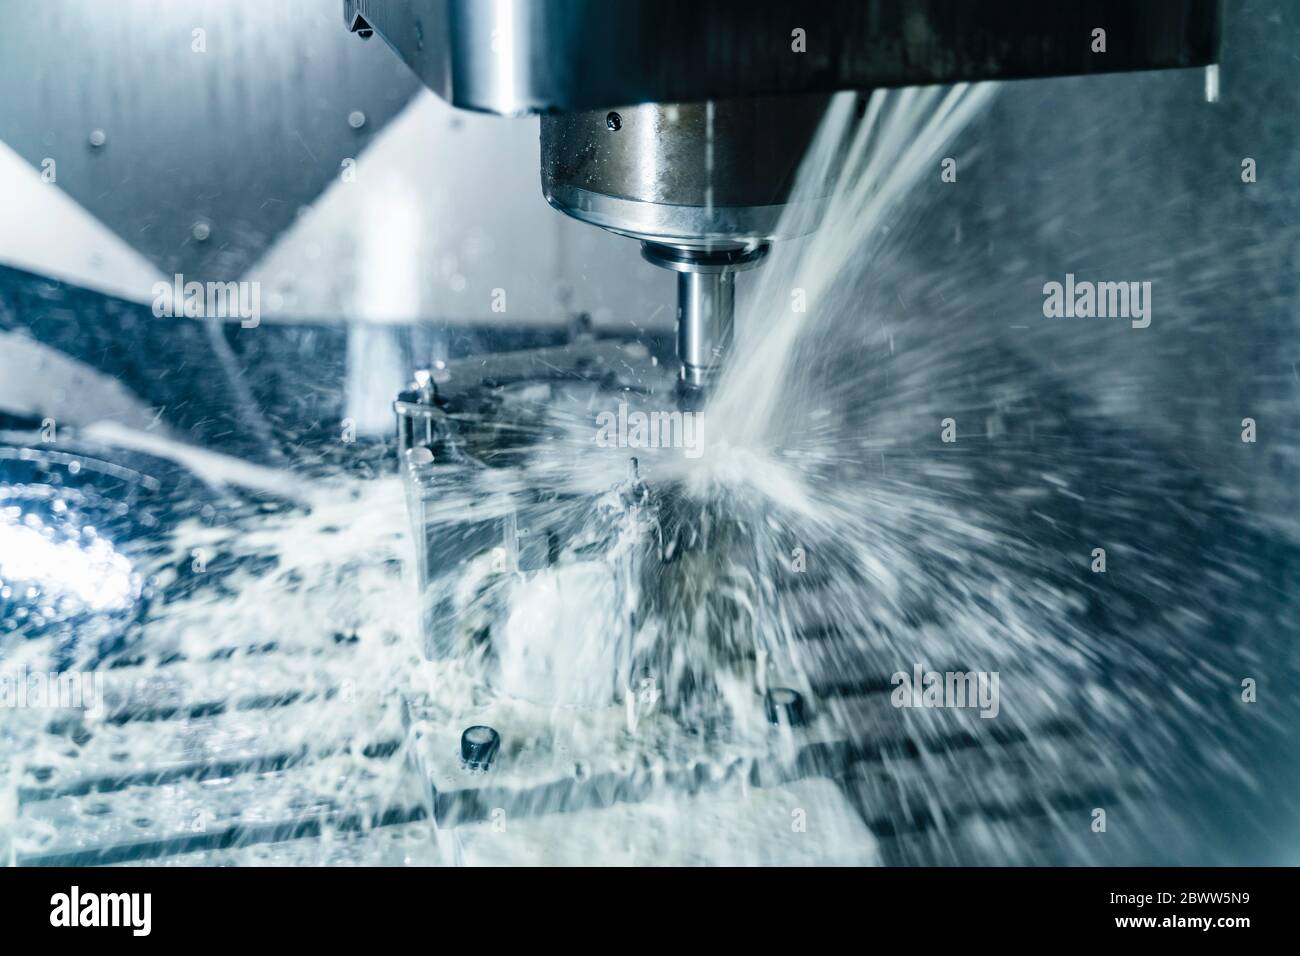 Germany, Close-up of water cooling down milling cutter Stock Photo